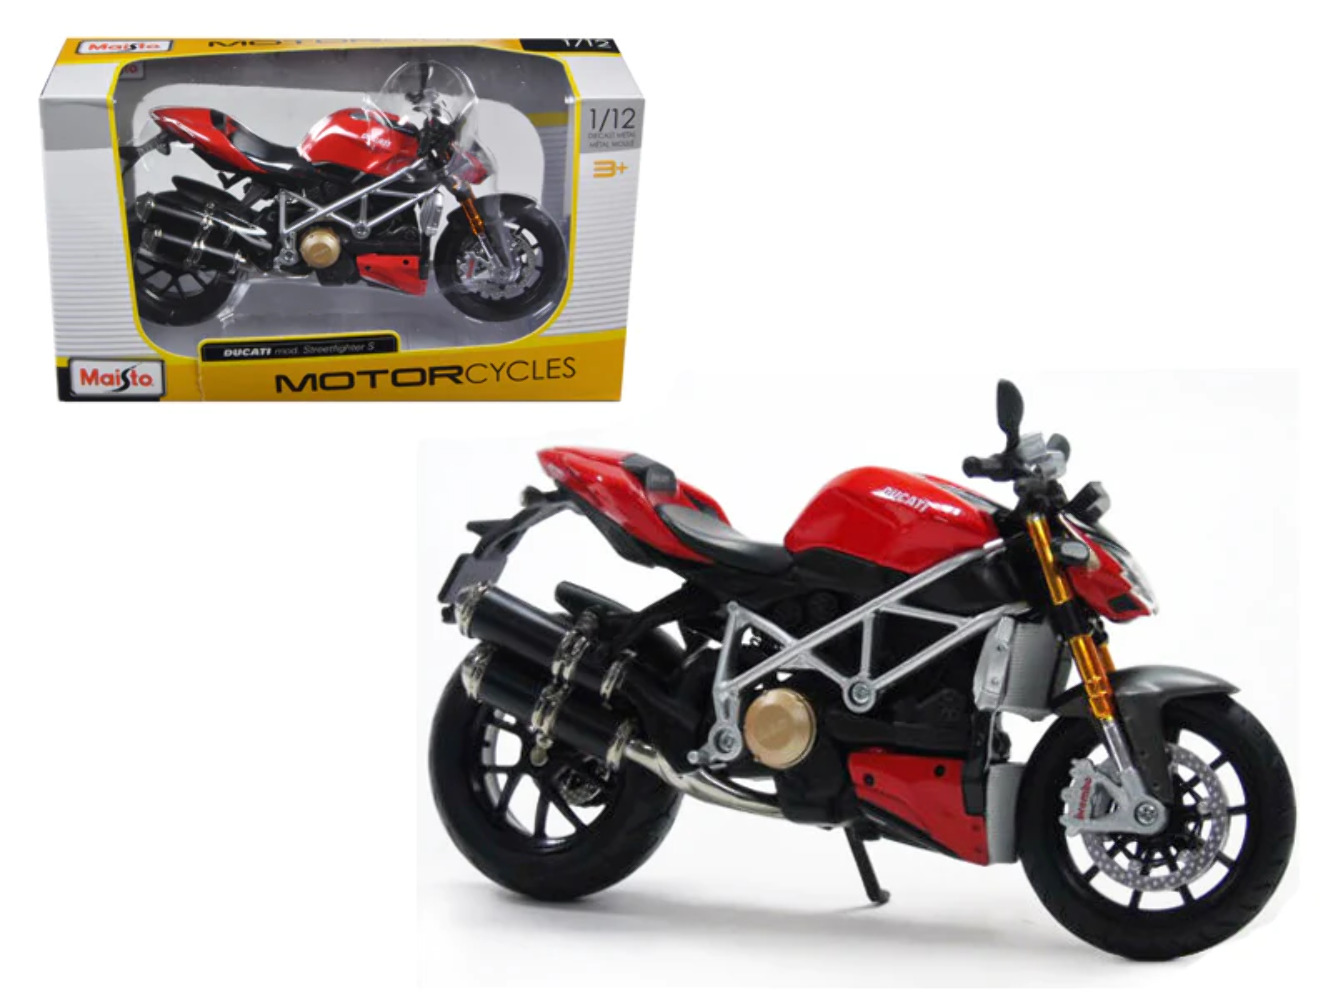 Ducati Mod Streetfighter S Red 1/12 Diecast Motorcycle Model